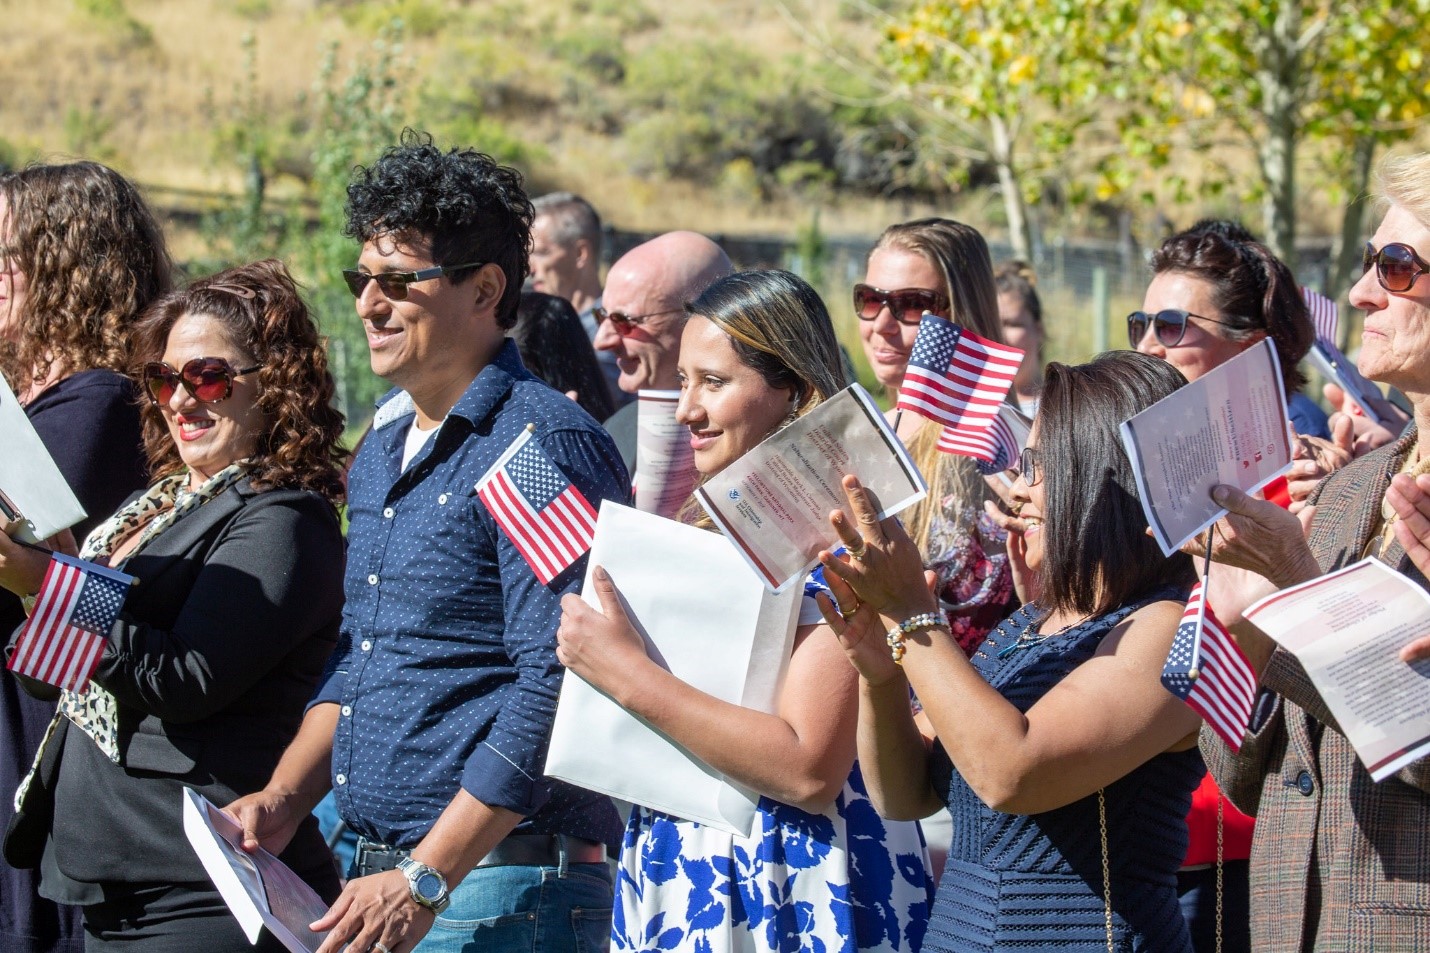 A group of people stand and hold small American flags and certificates. It's a sunny day as many are wearing sunglasses.